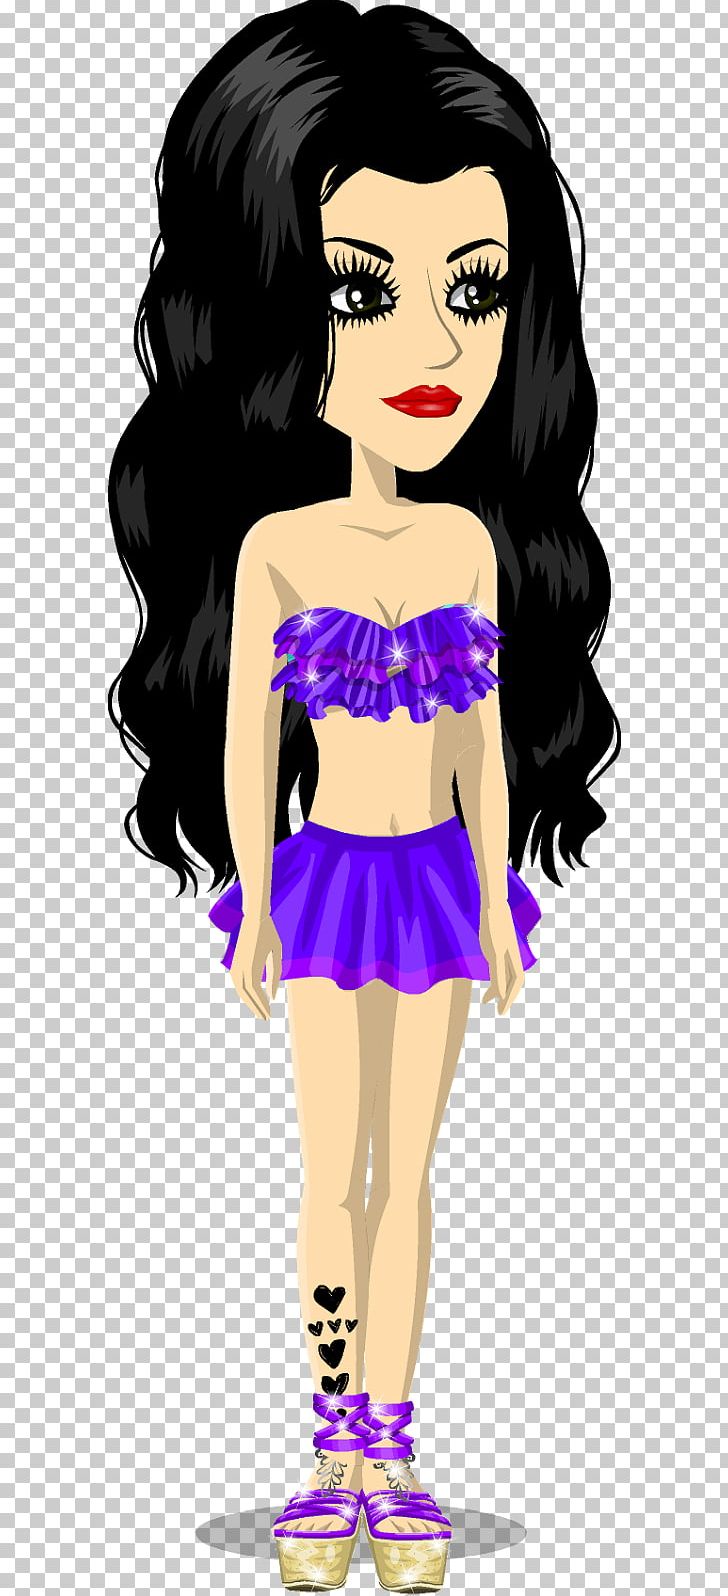 MovieStarPlanet Fashion Hairstyle Clothing Female PNG, Clipart, Art, Black Hair, Brown Hair, Cartoon, Clothing Free PNG Download